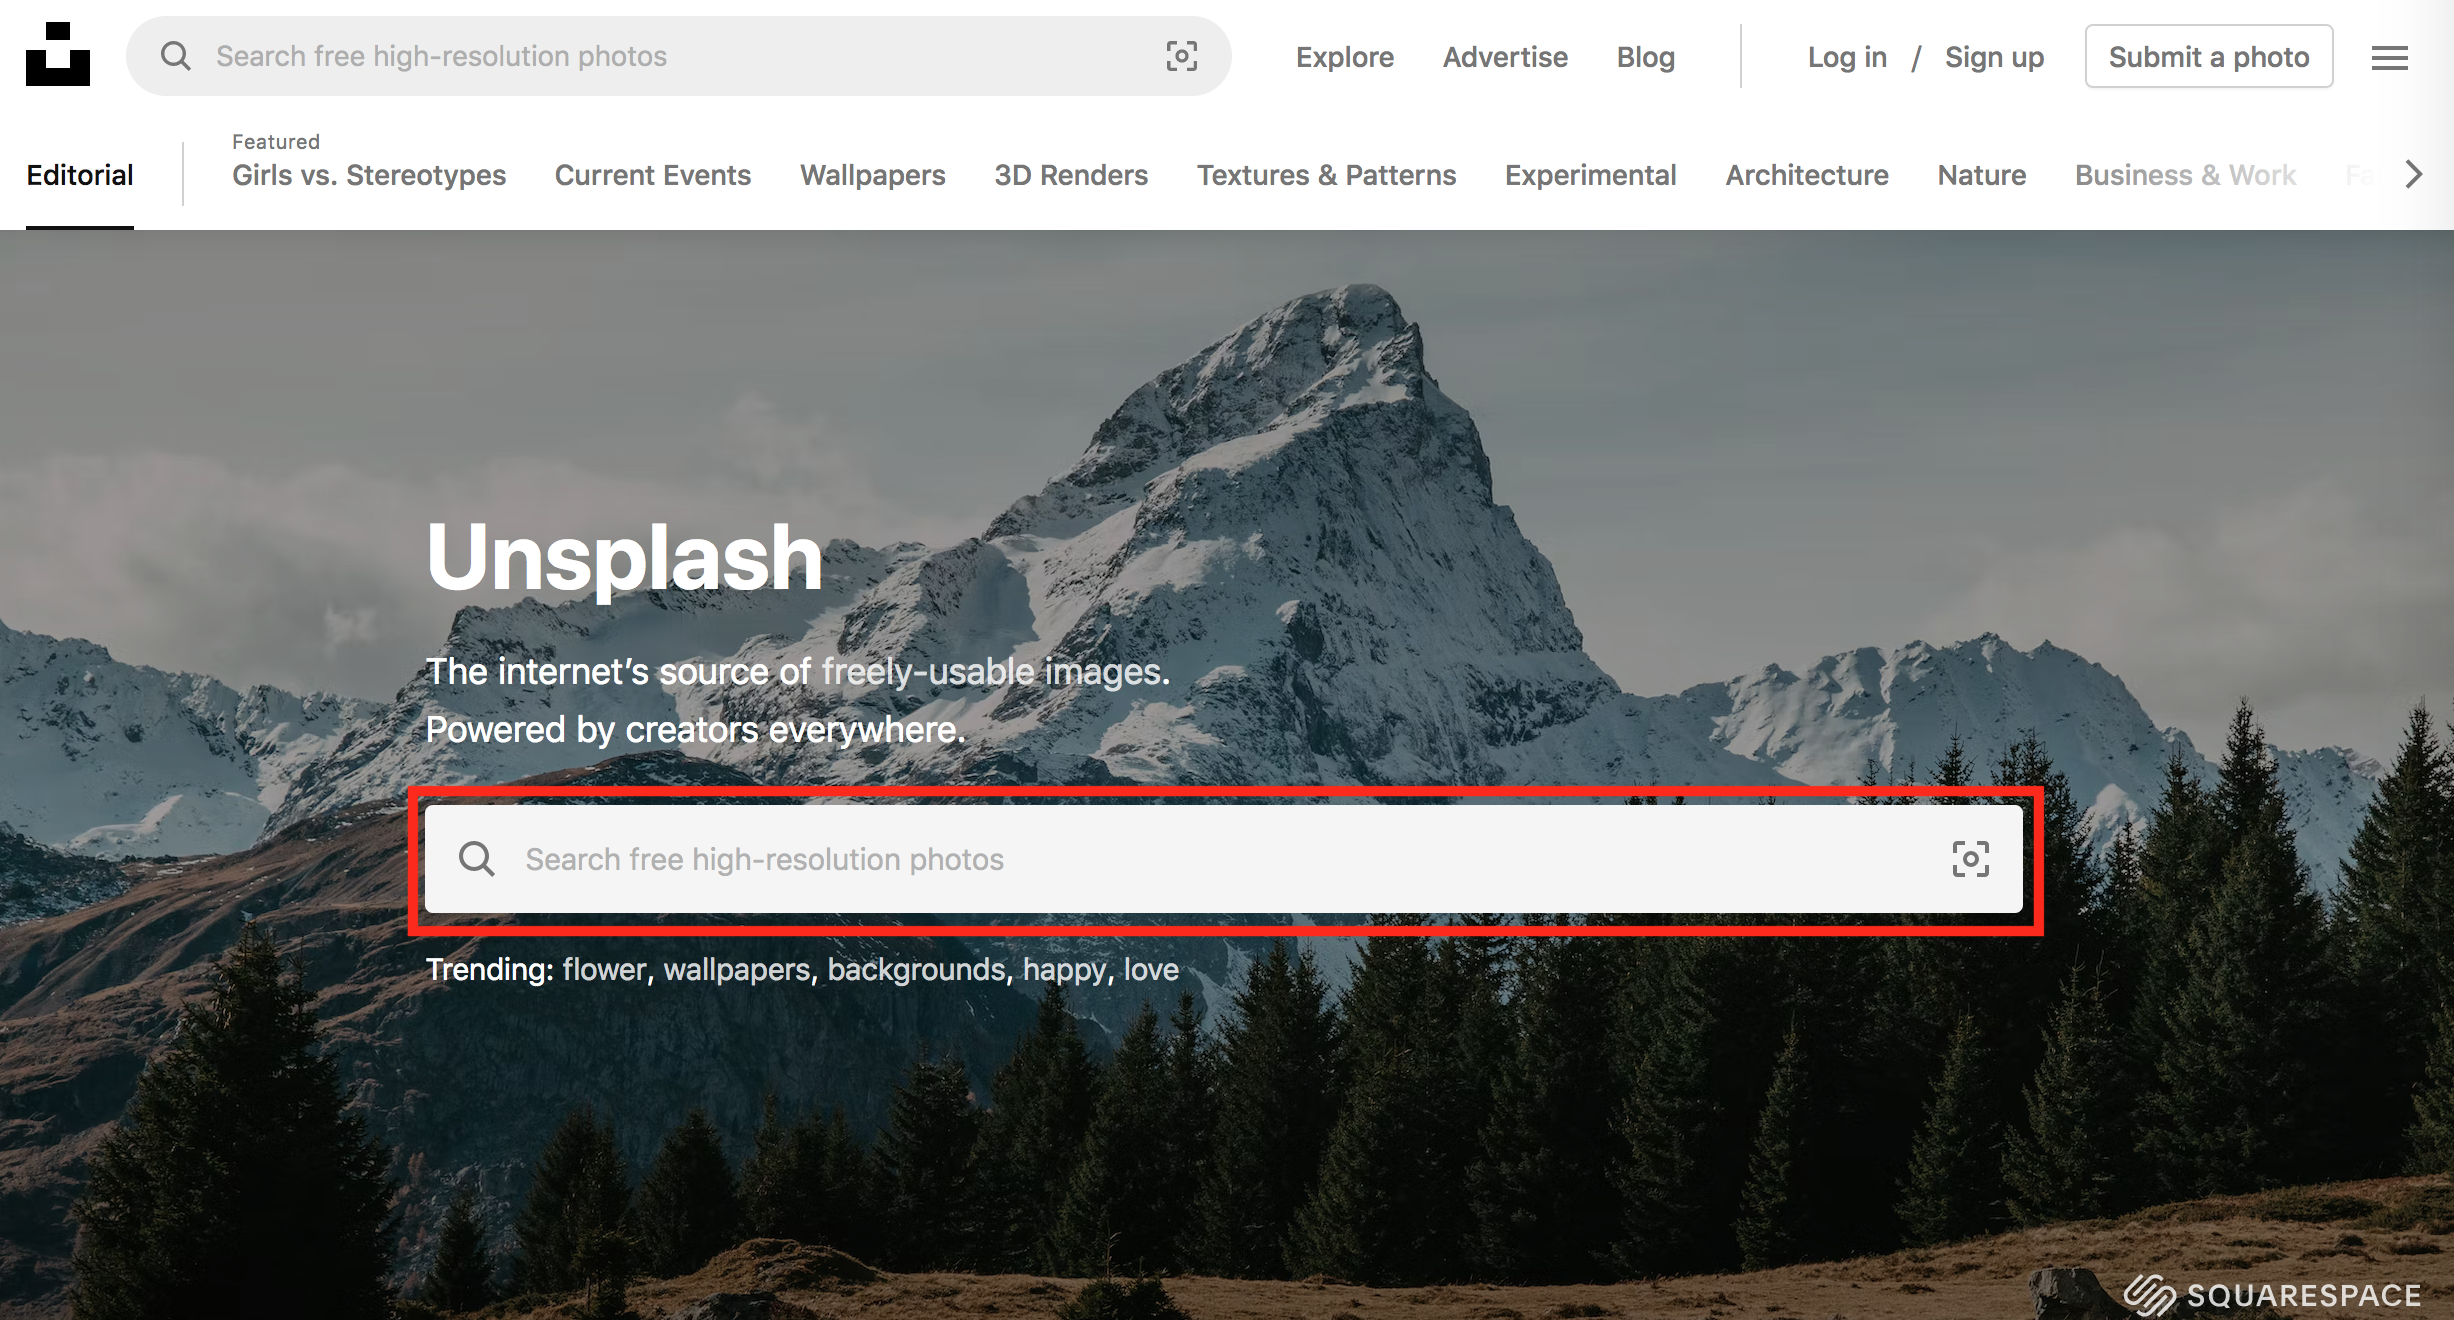 Unsplash home page with search bar